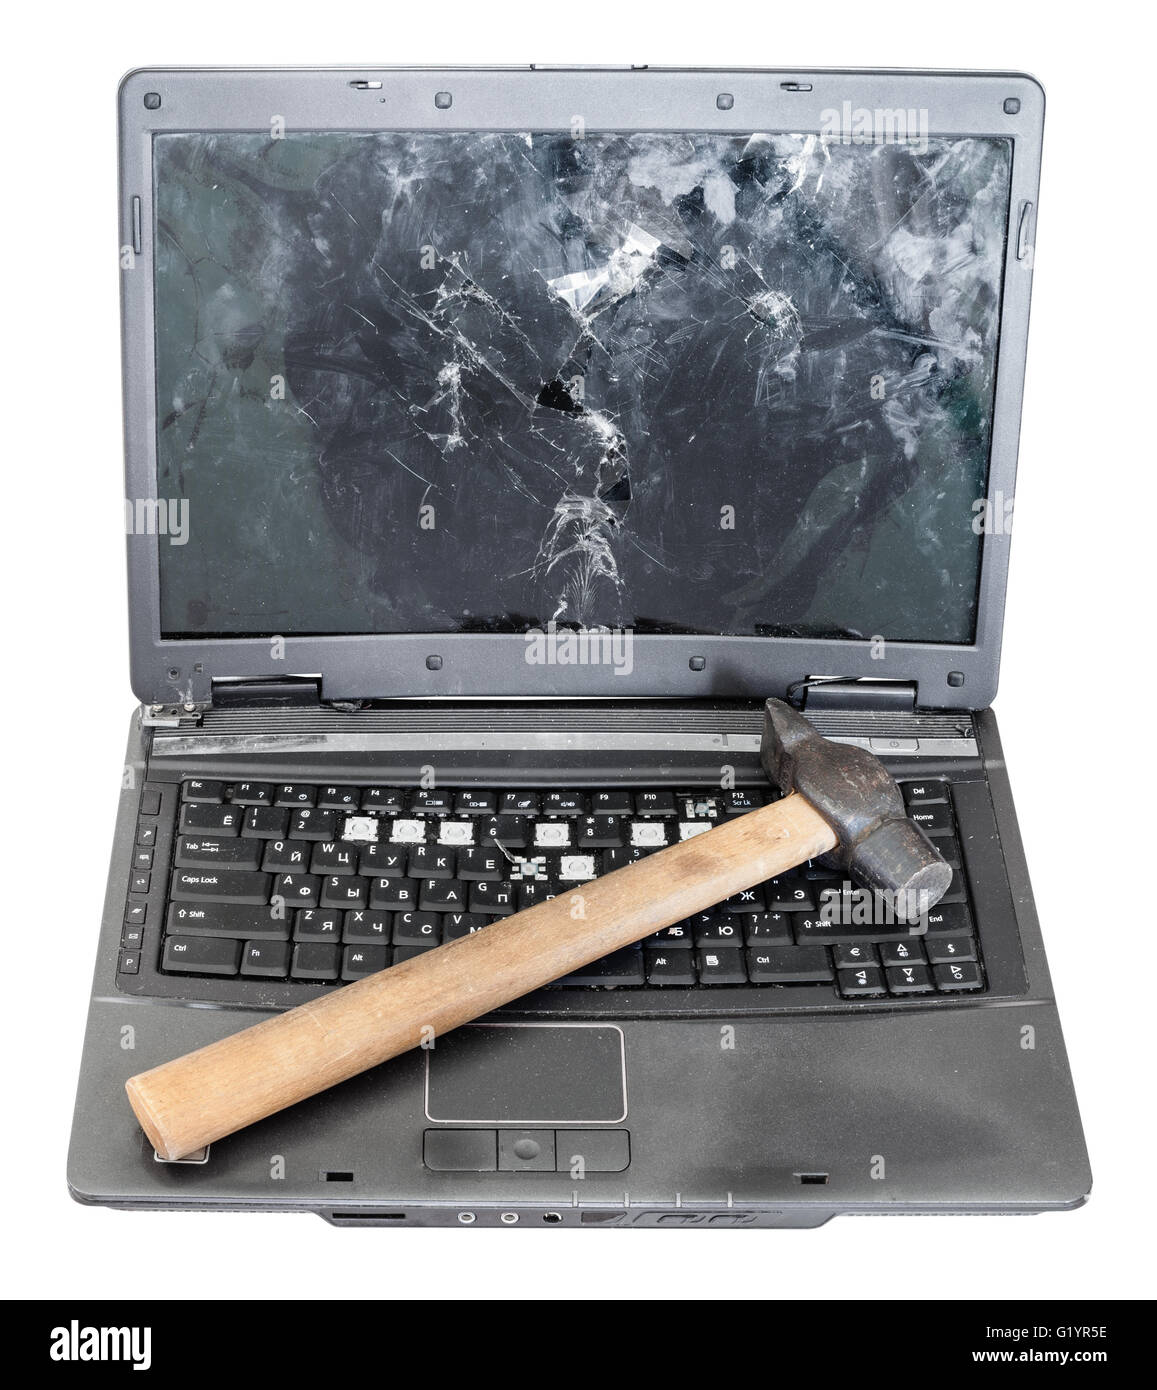 front view of old broken laptop with hammer on keyboard isolated on white background Stock Photo